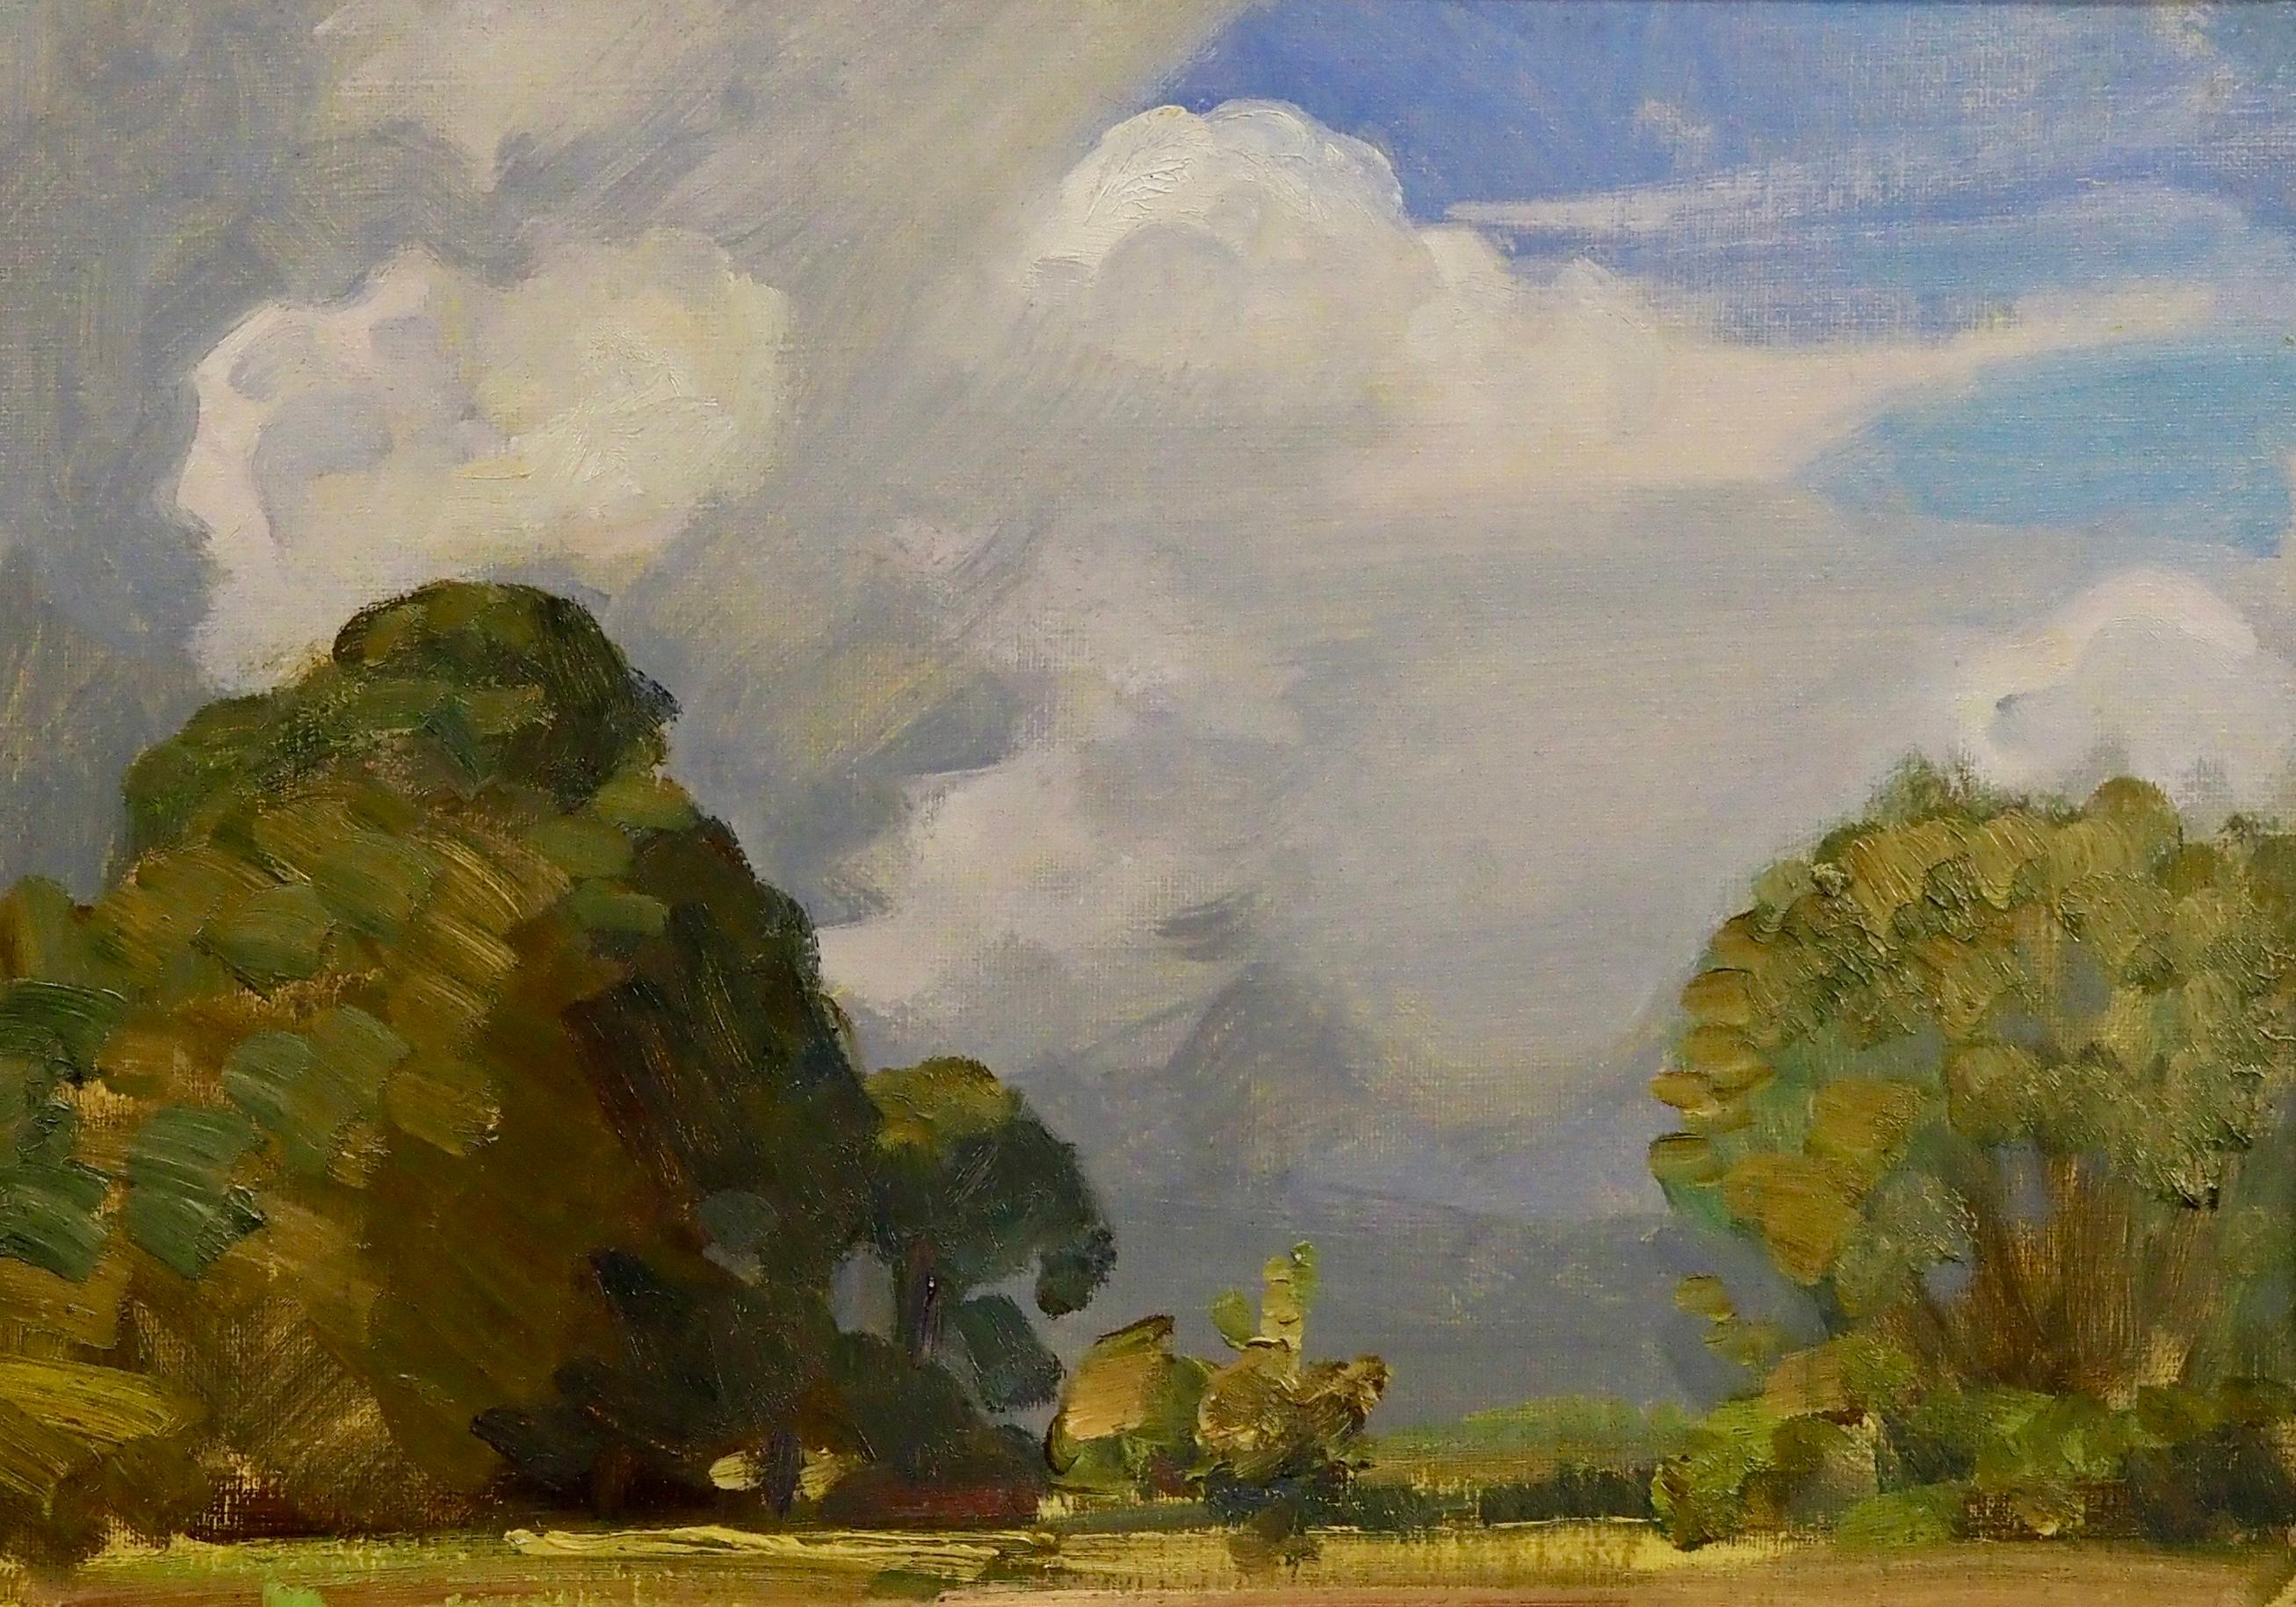 Landscape Study - Painting by Harold Speed